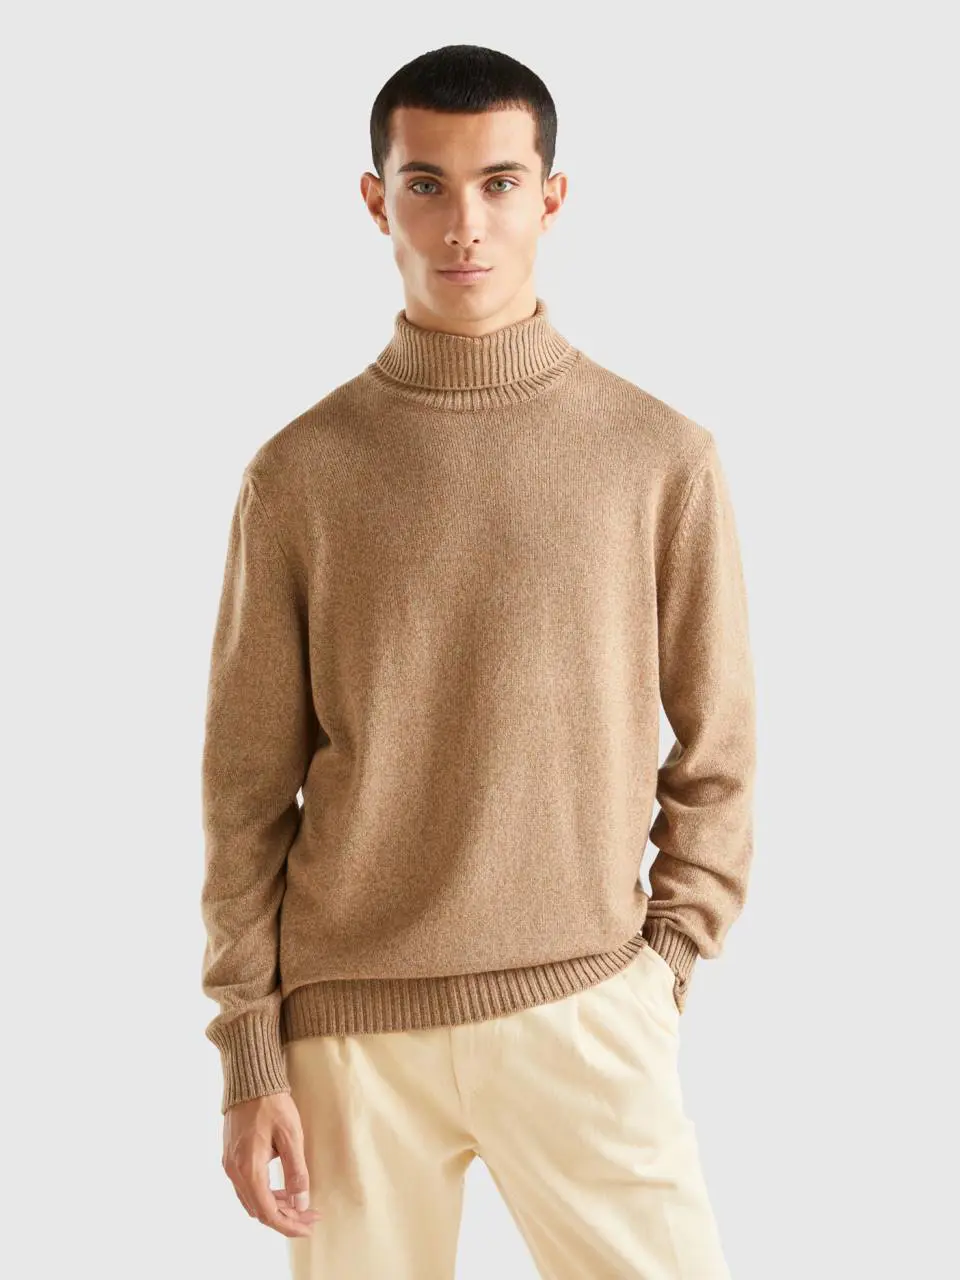 Benetton turtleneck sweater in cashmere and wool blend. 1